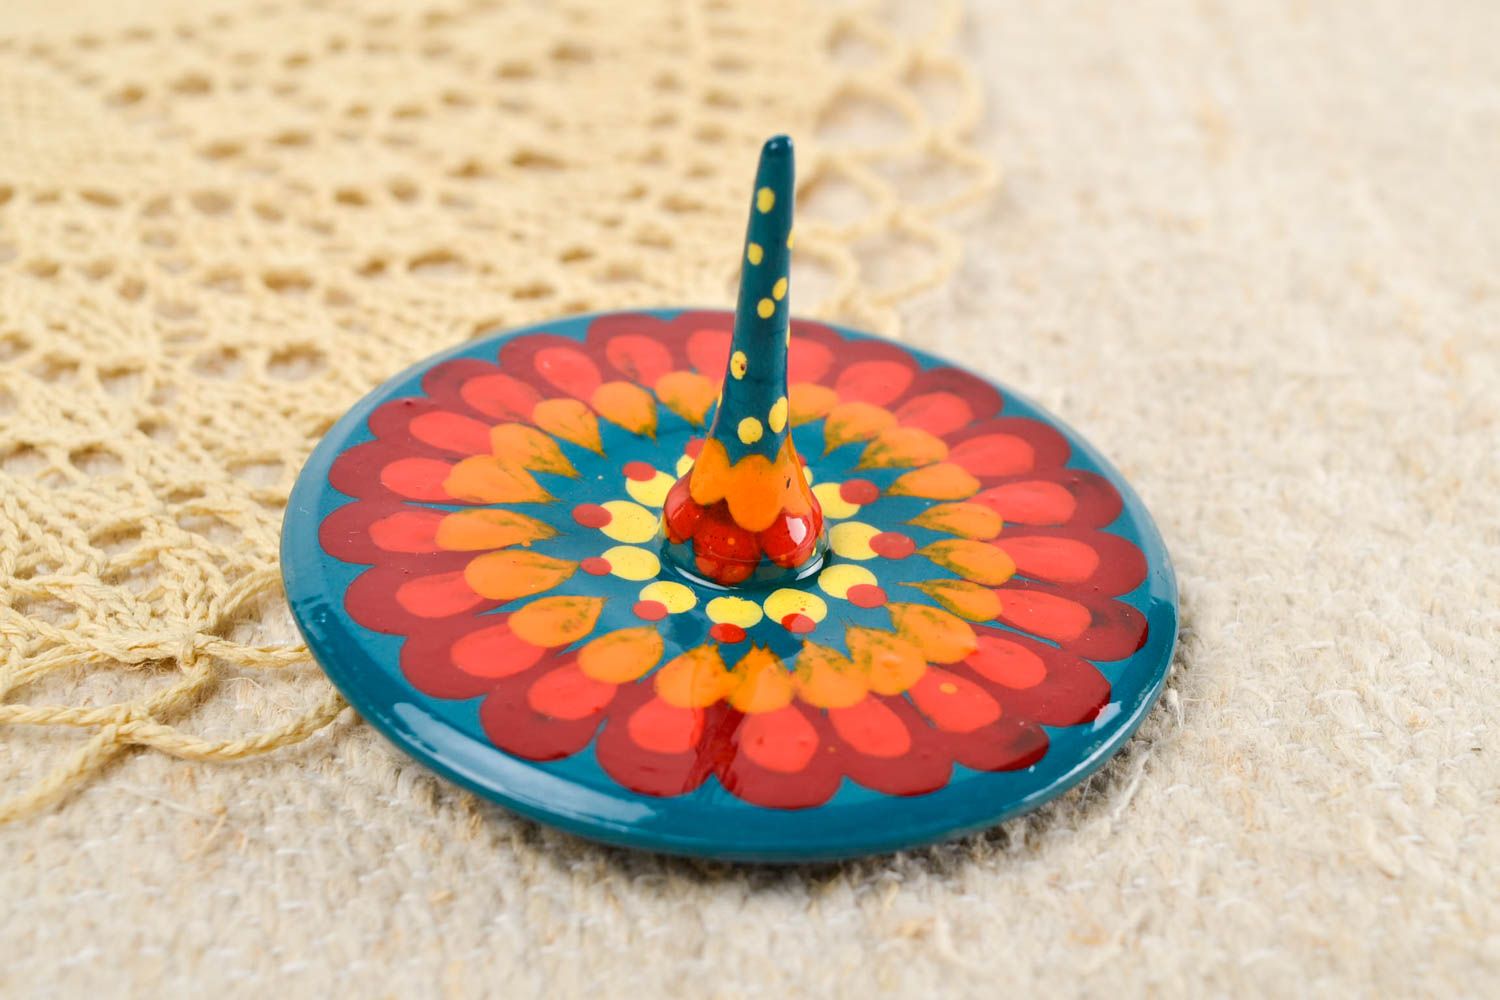 Small handmade wooden spin top design smart toy for kids birthday gift ideas photo 1